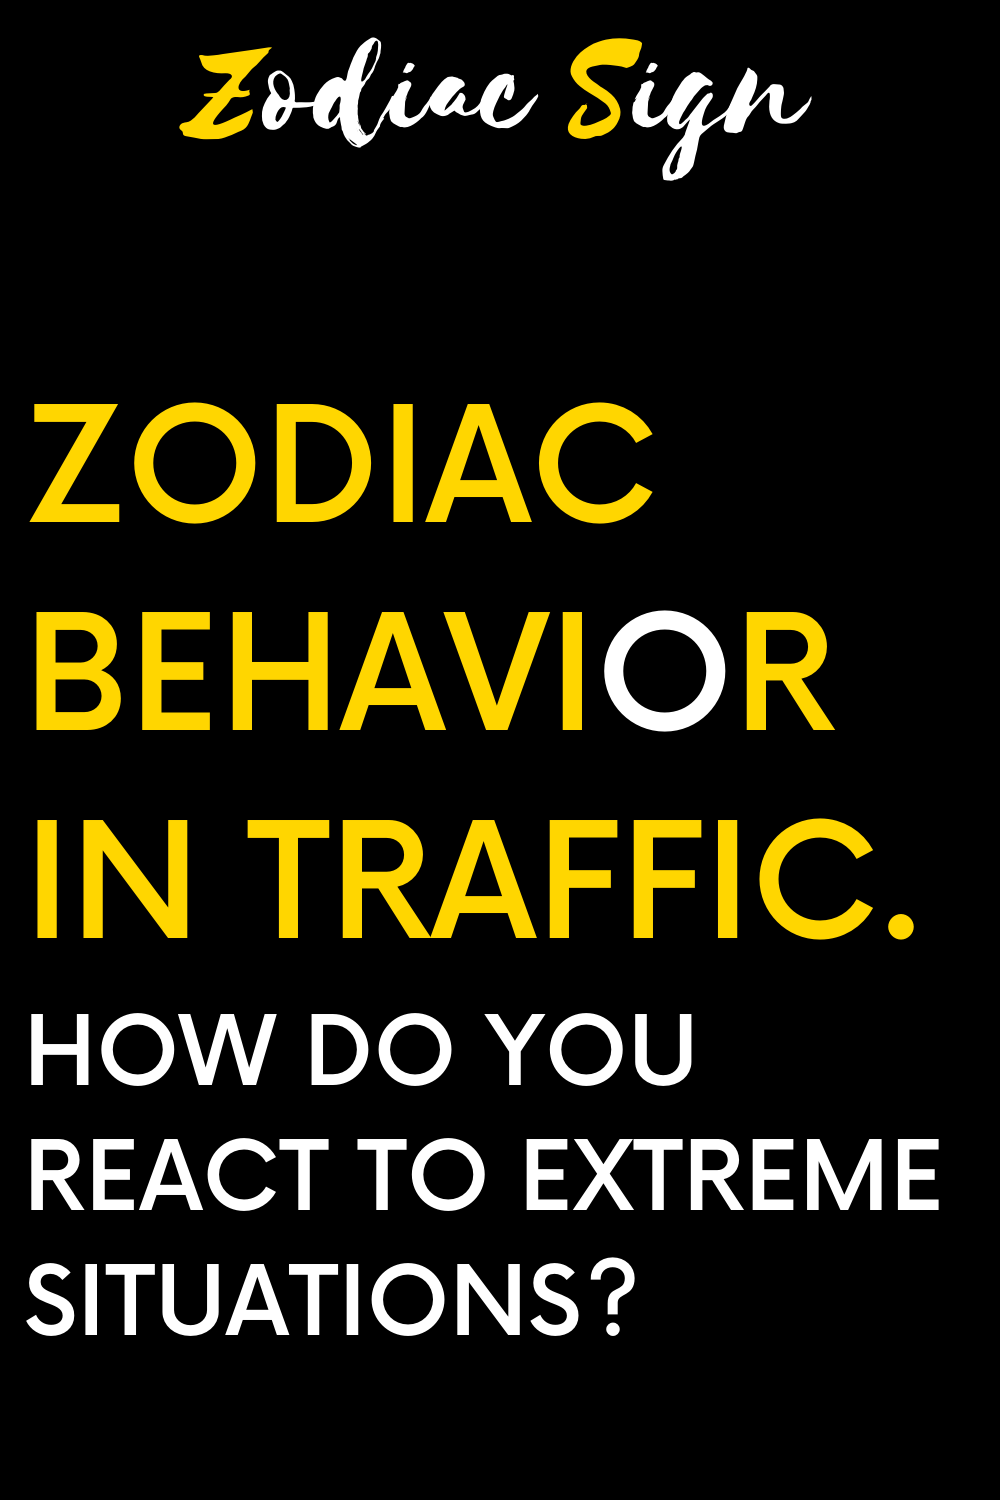 Zodiac behavior in traffic. How do you react to extreme situations?